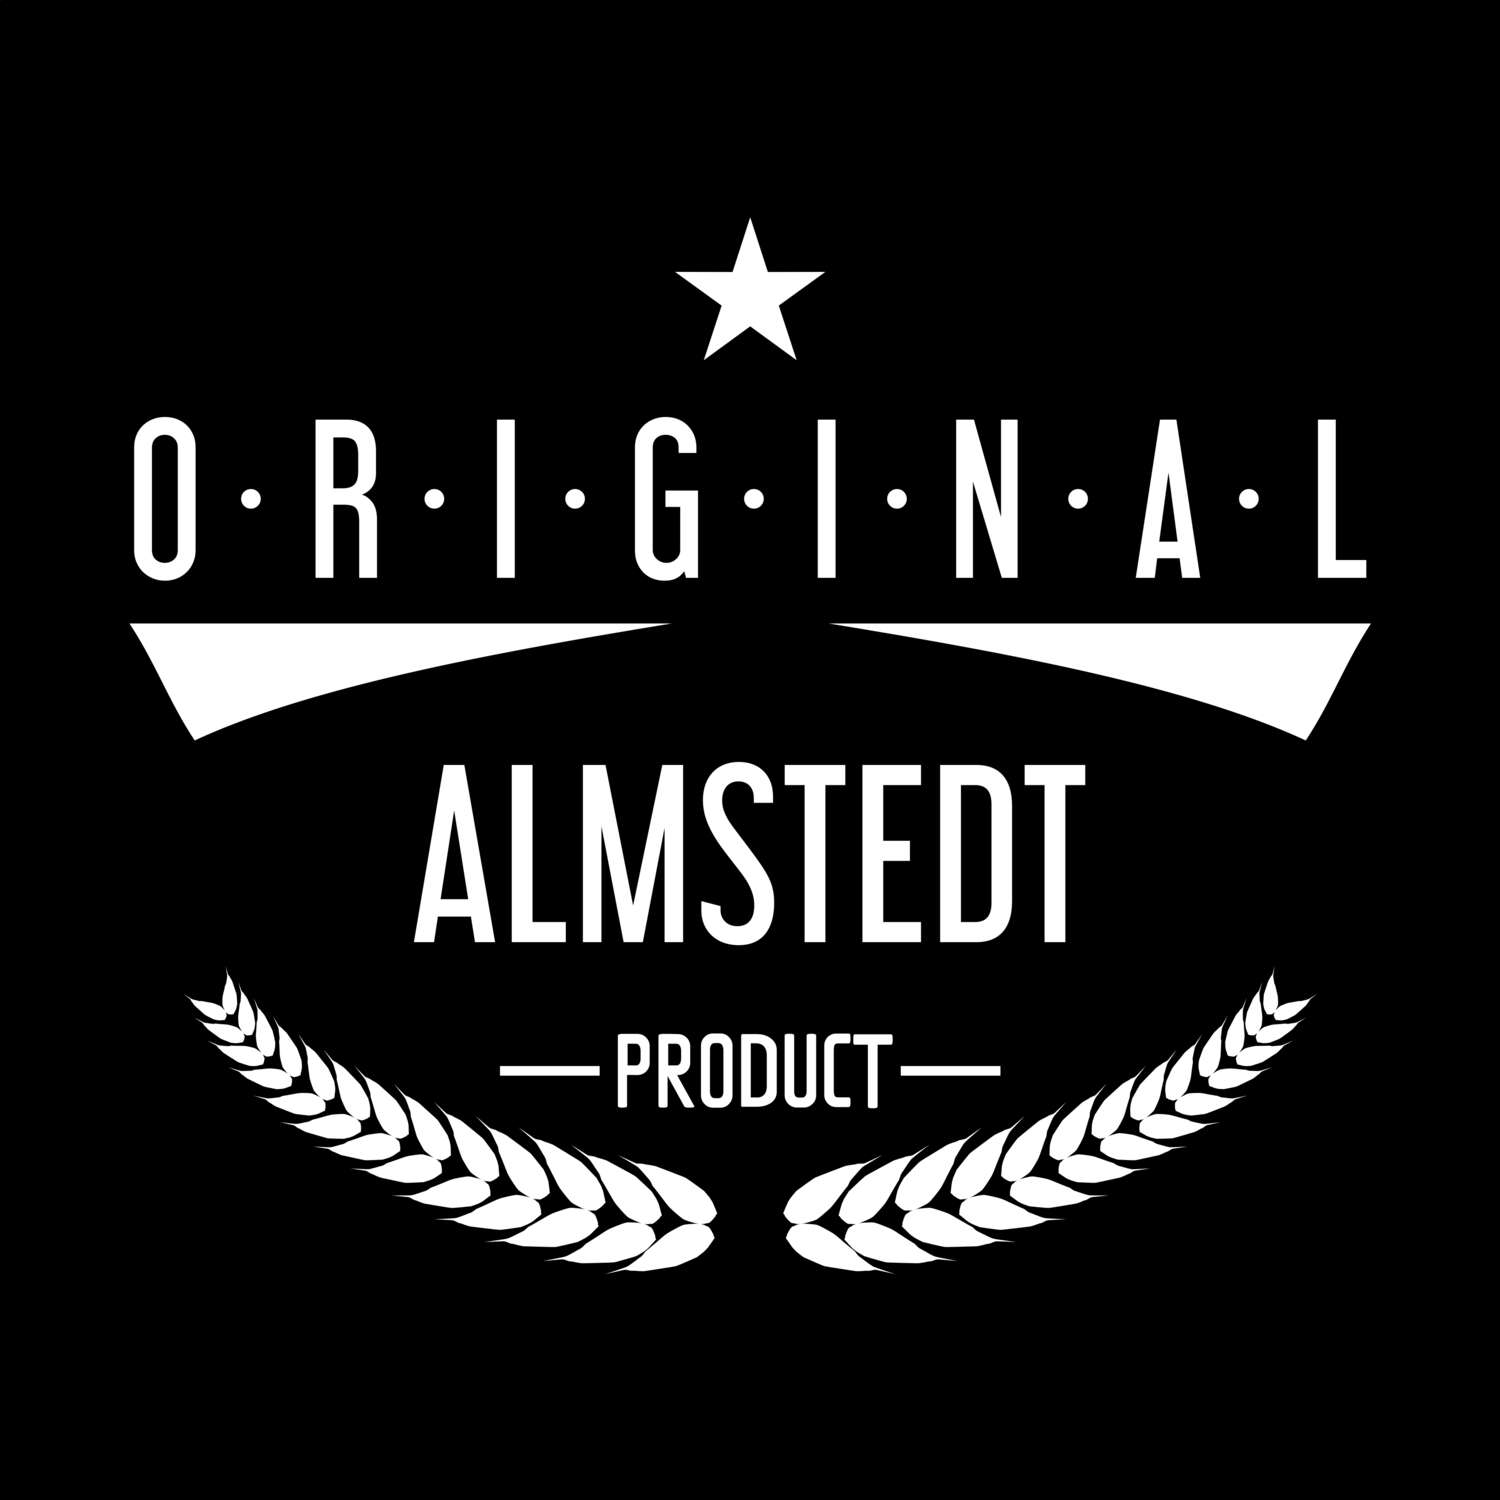 Almstedt T-Shirt »Original Product«